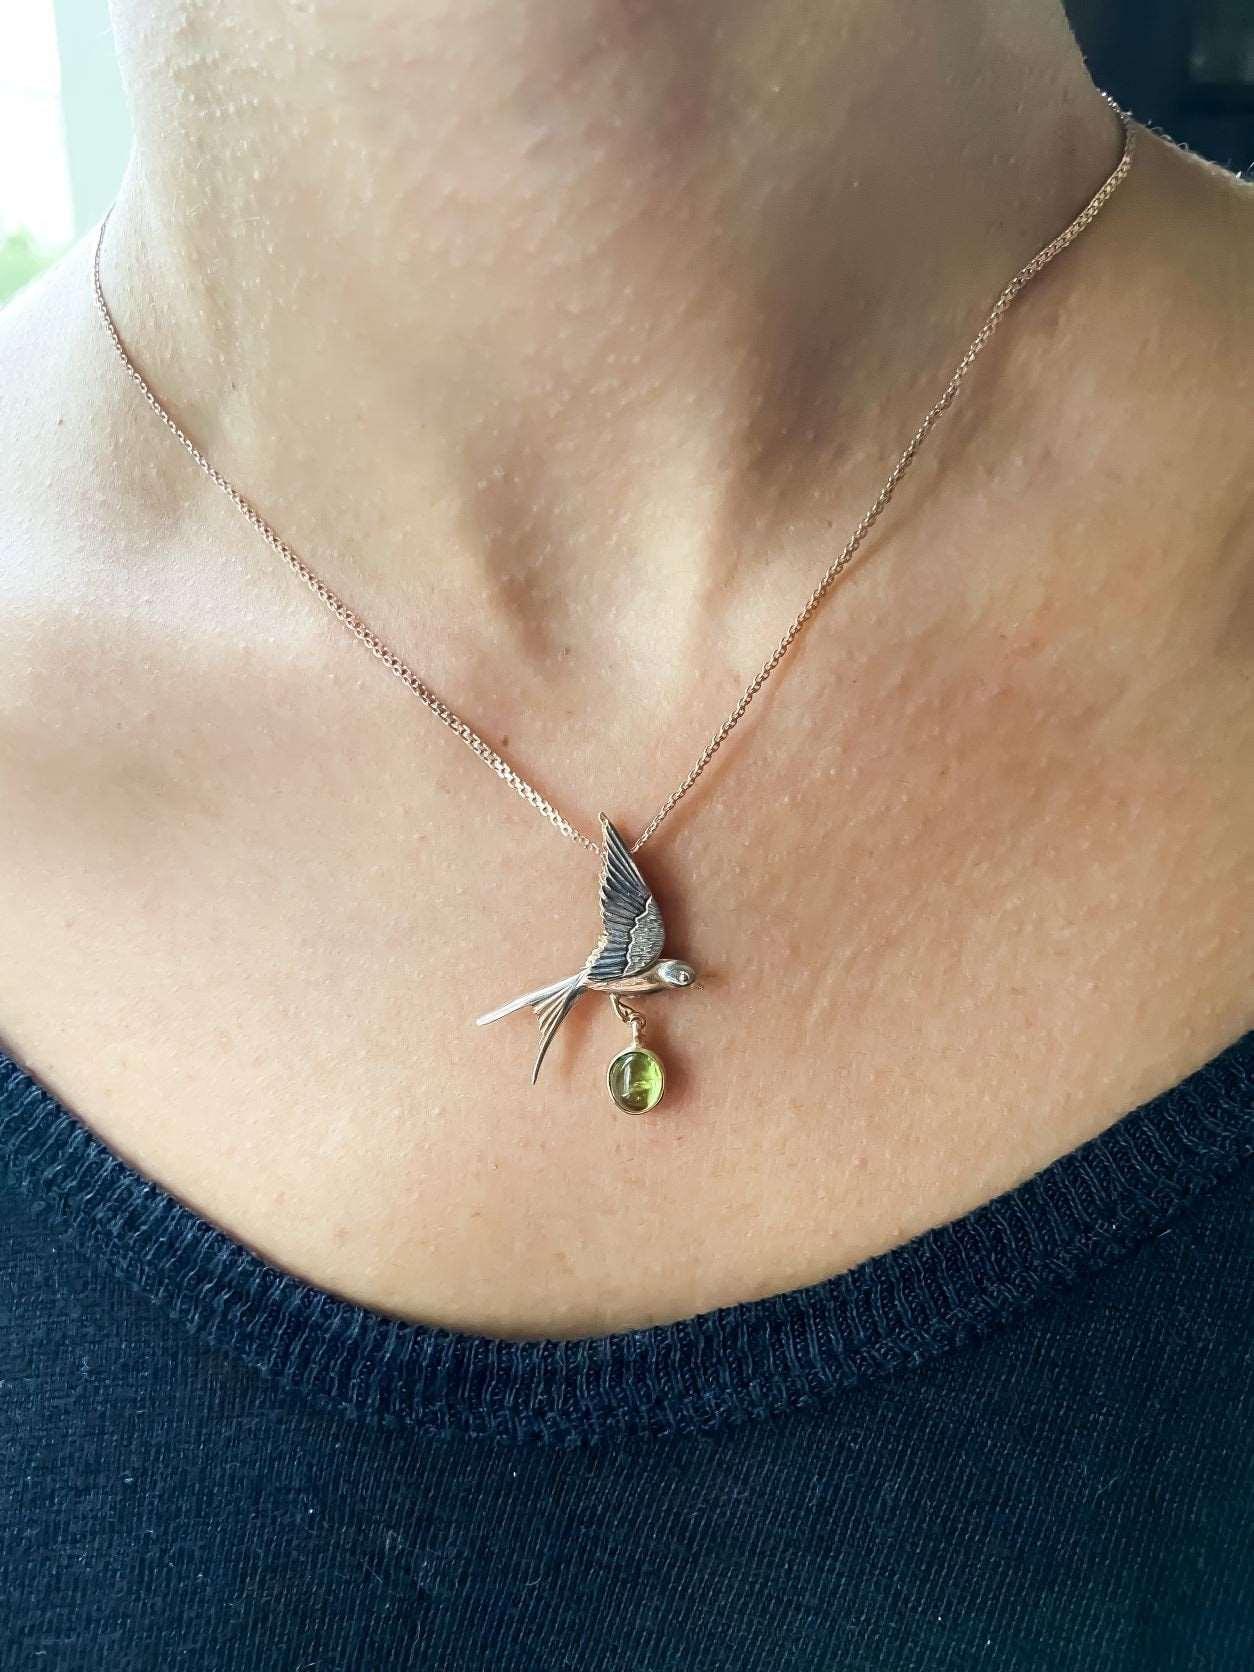 Handmade Peridot Swallow Bird Necklace, 925 Sterling Silver Swallow Pendant, Flapping Wings Pendant, Bird Jewellery, Custom Animal Necklace - Tracesilver